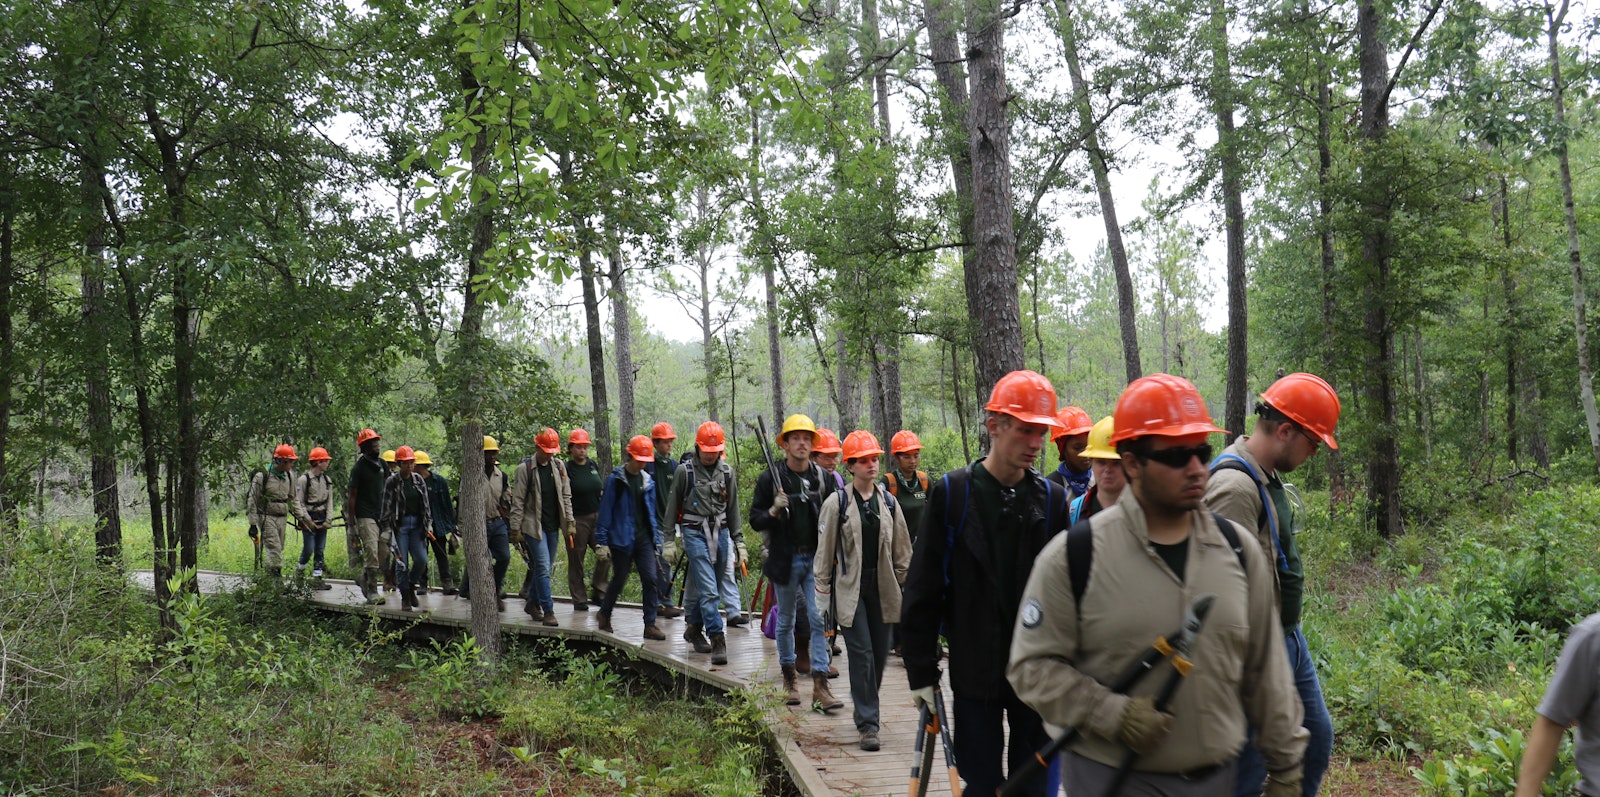 A service corps crew, all in hardhats, walks along an elevated wooden platform through a wood